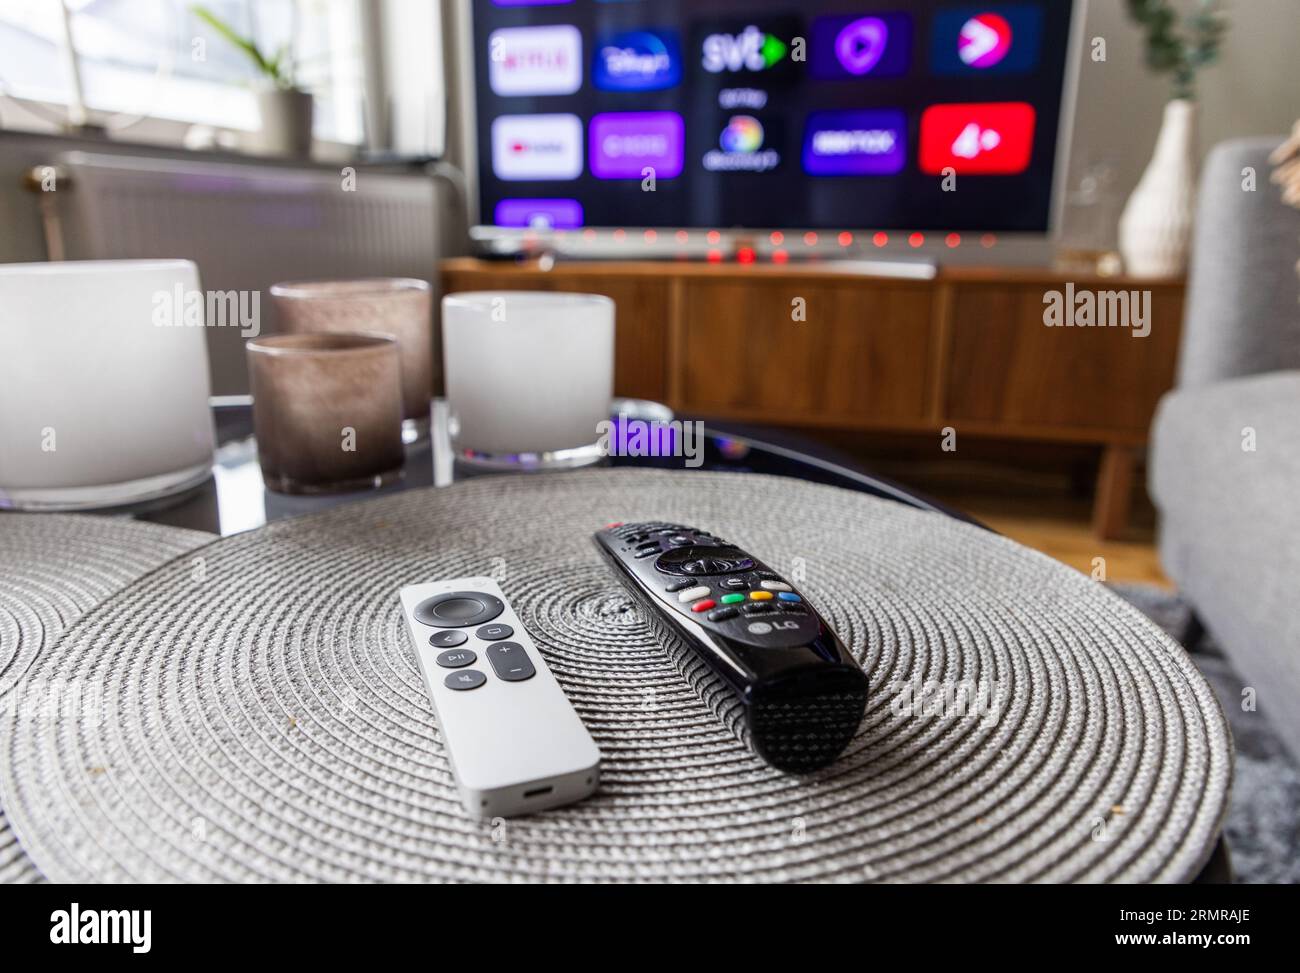 Remote controls in front of a tv screen in a home. Stock Photo